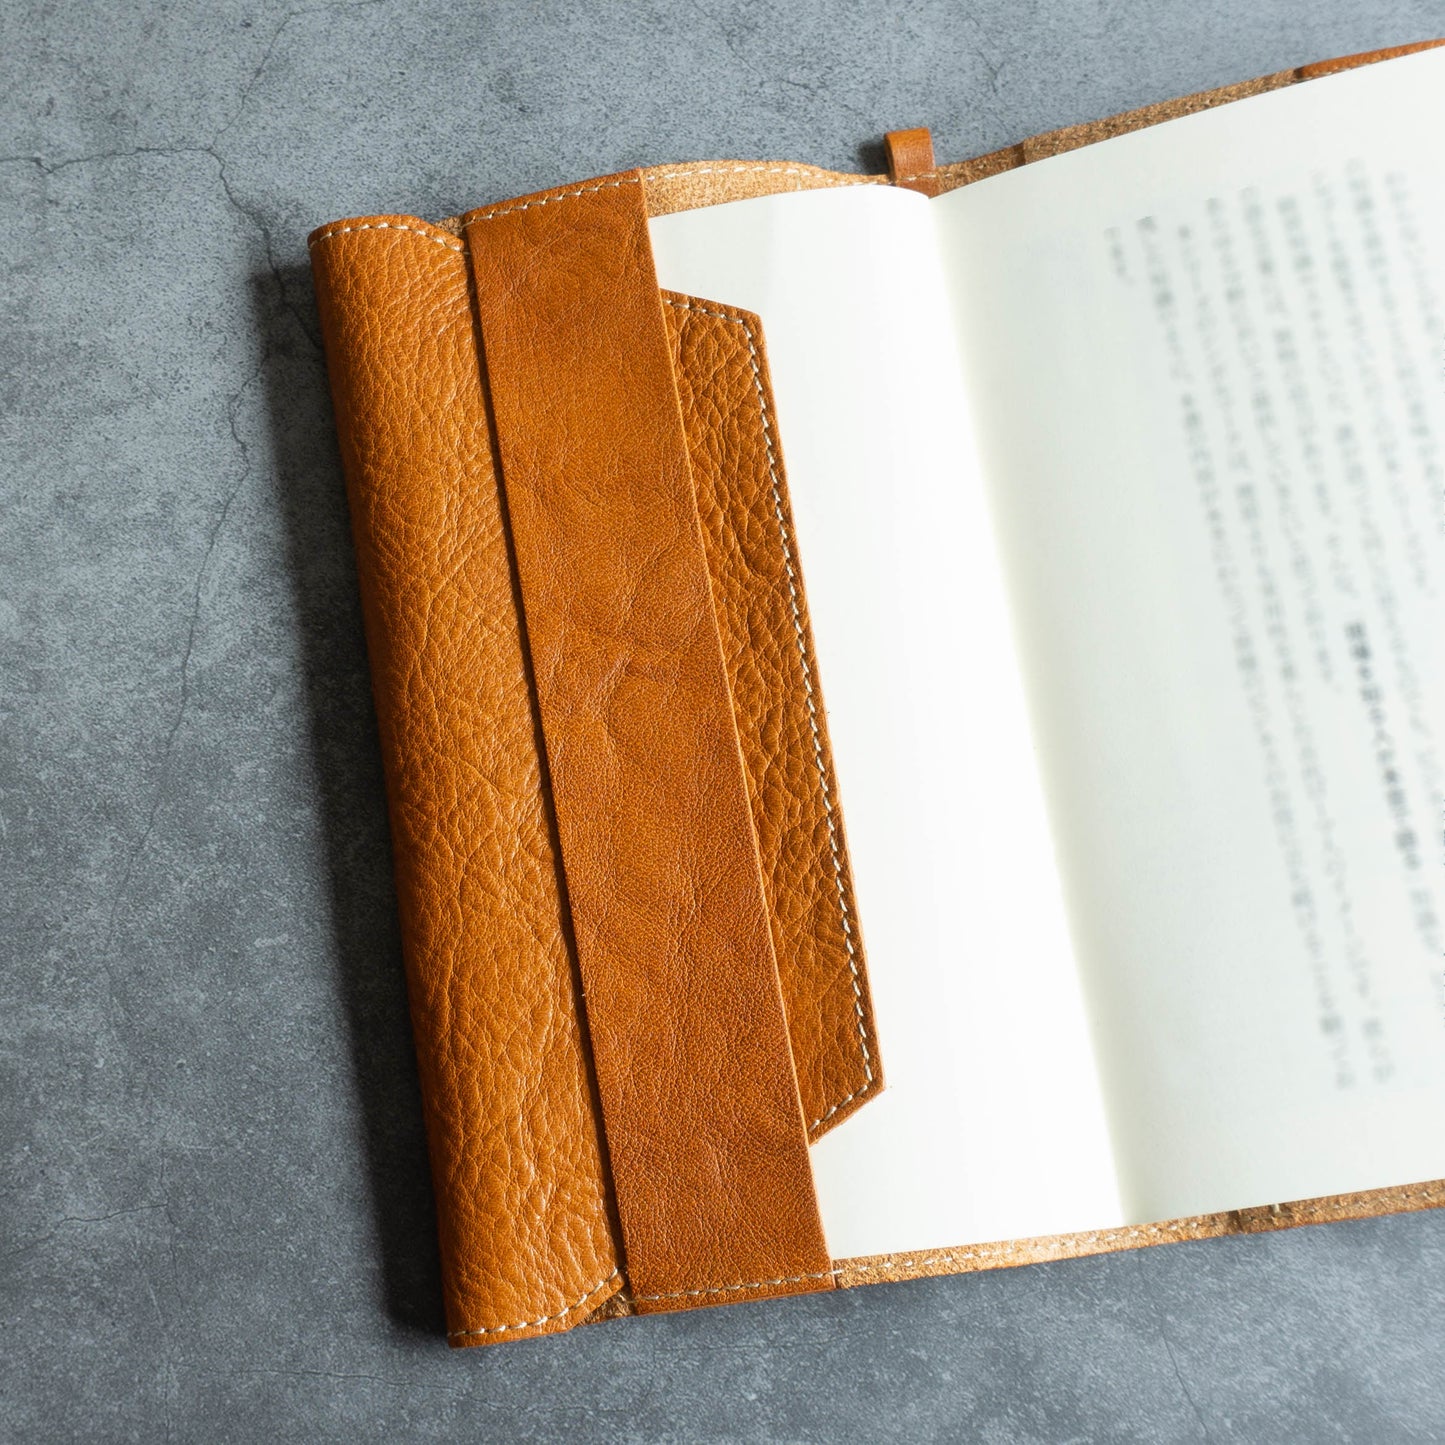 [Japanese Craftsman Made / Shrink] Book Cover "Shinsyo-ban" size Genuine leather with bookmark